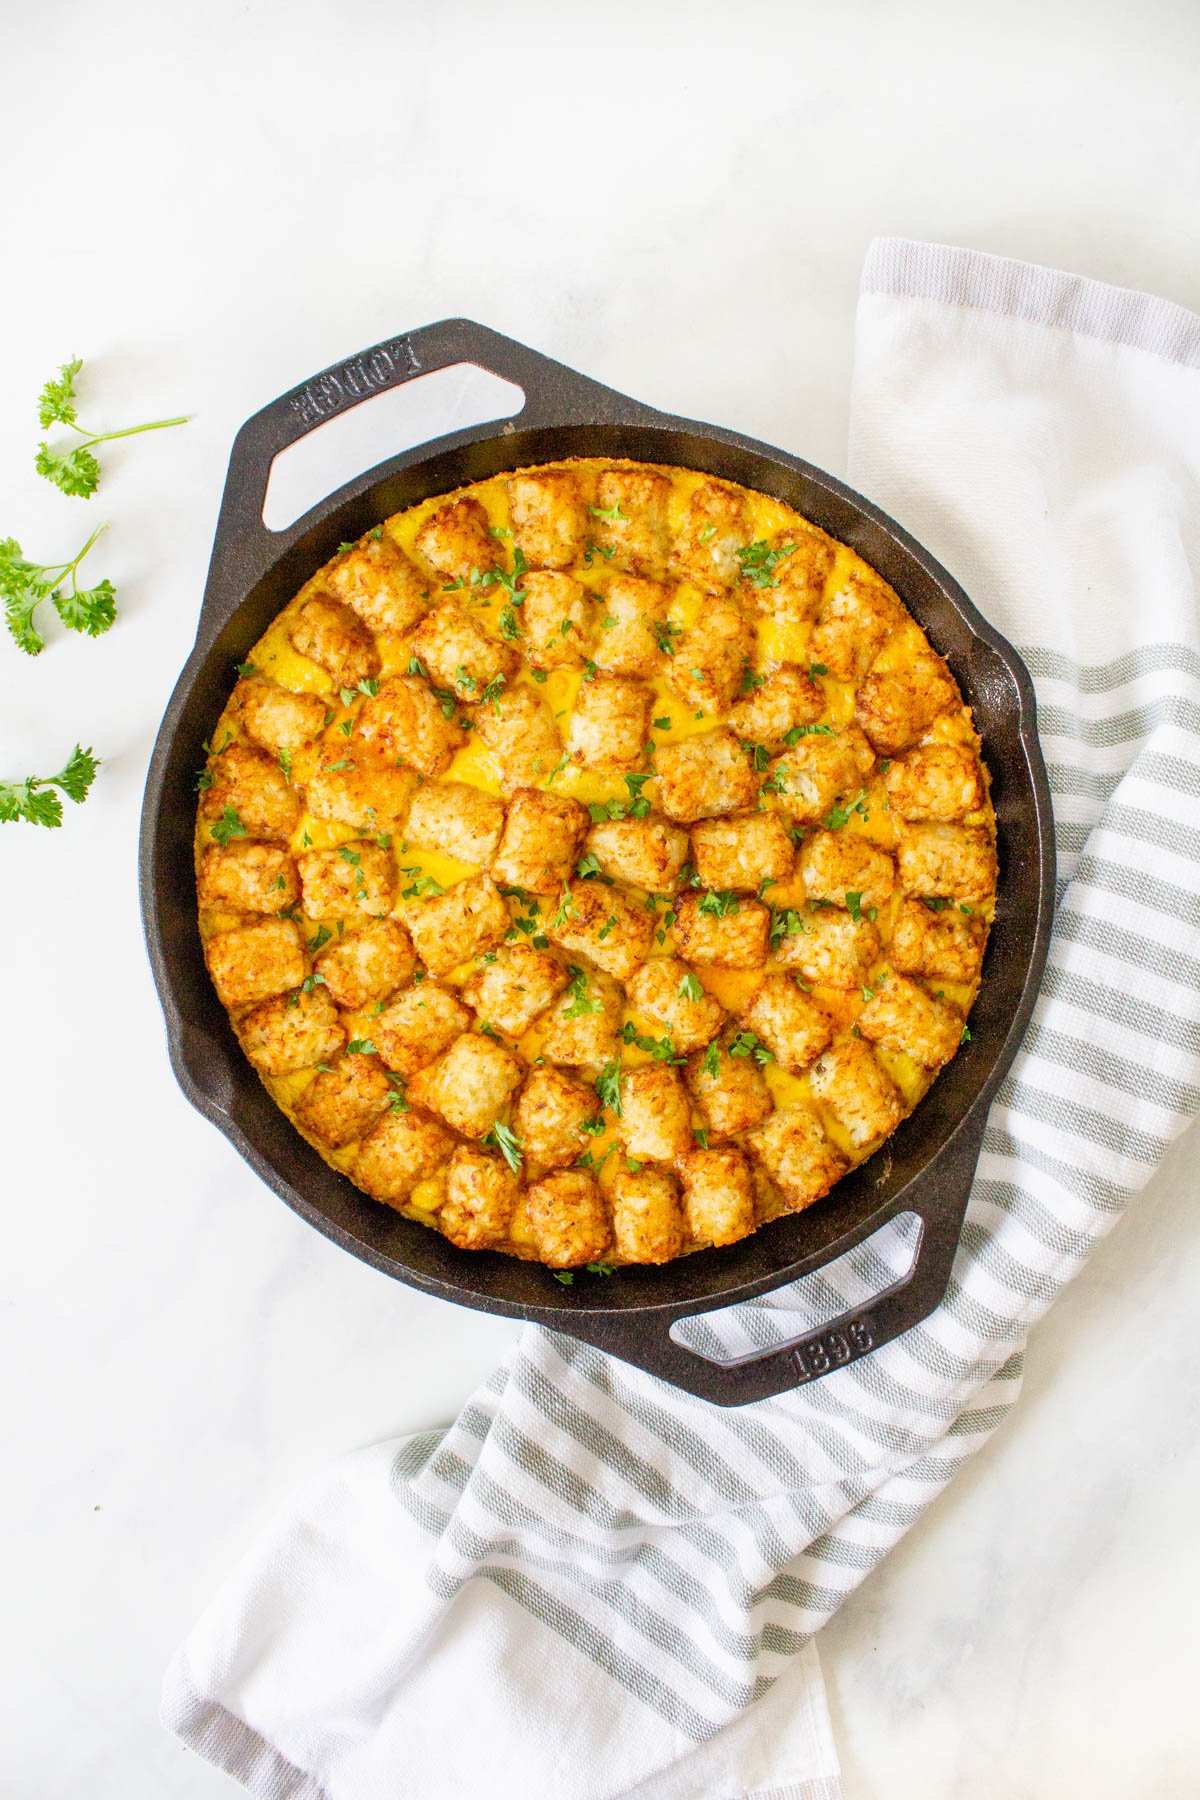 A cast iron skillet with a stuffed tater tot casserole.